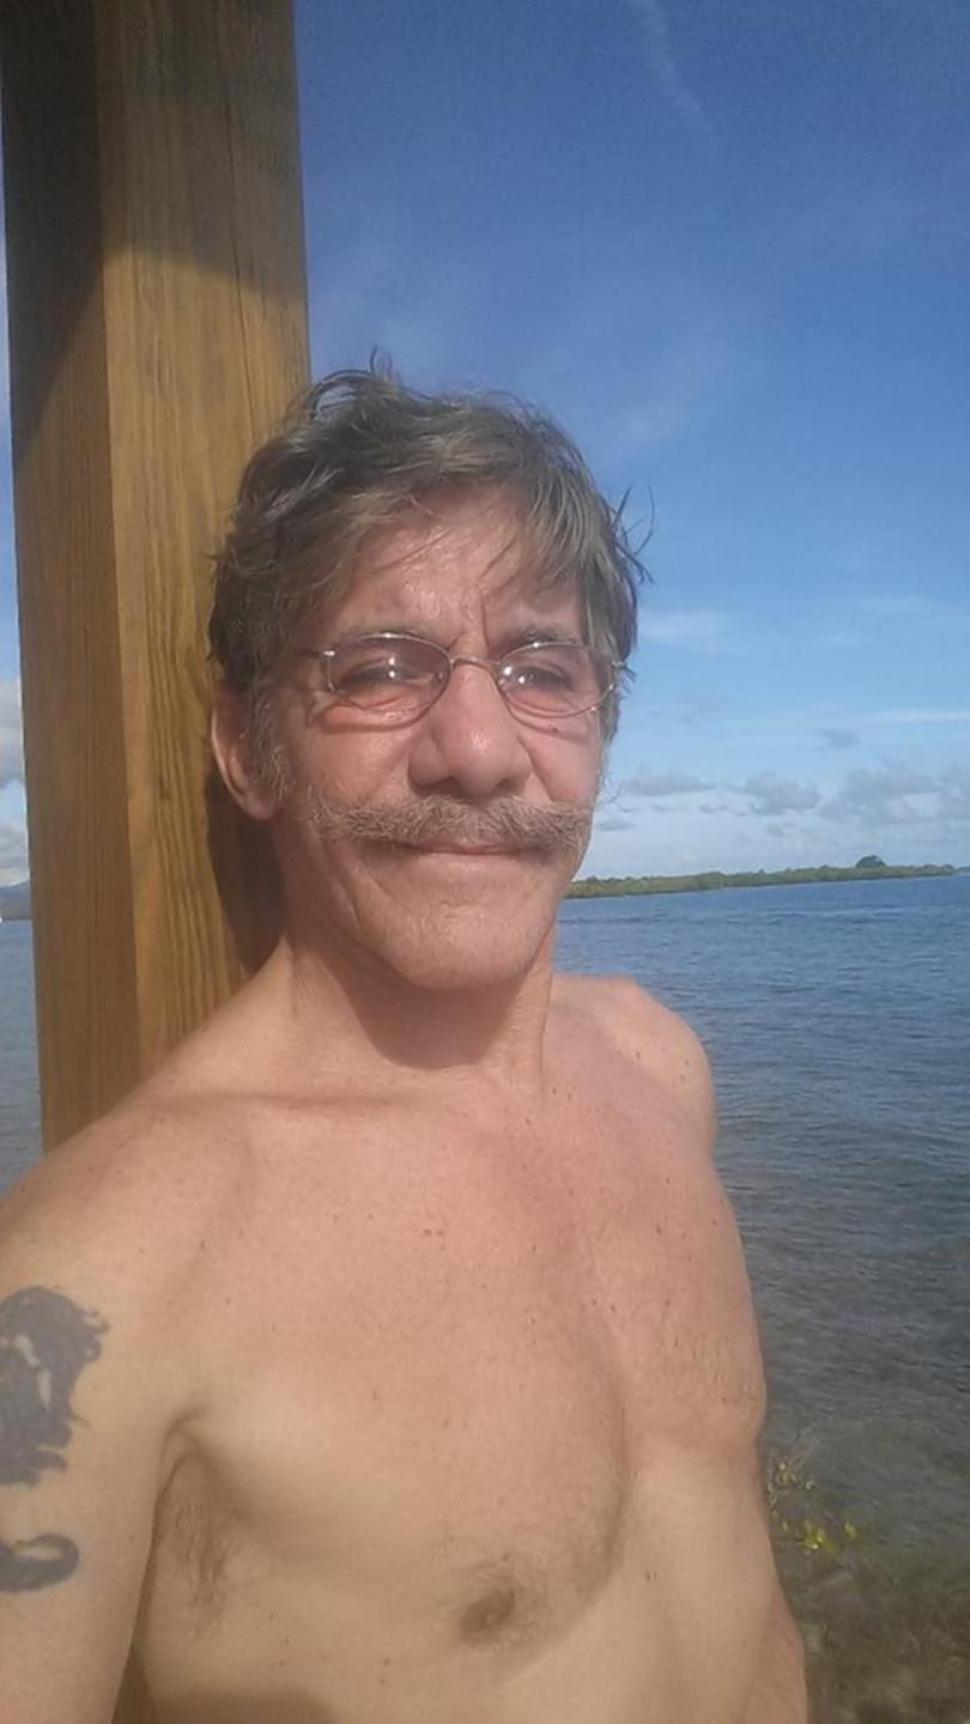 Some people thought it was weird when Geraldo Rivera included a topless selfie in a tweet about the situation in the Middle East.